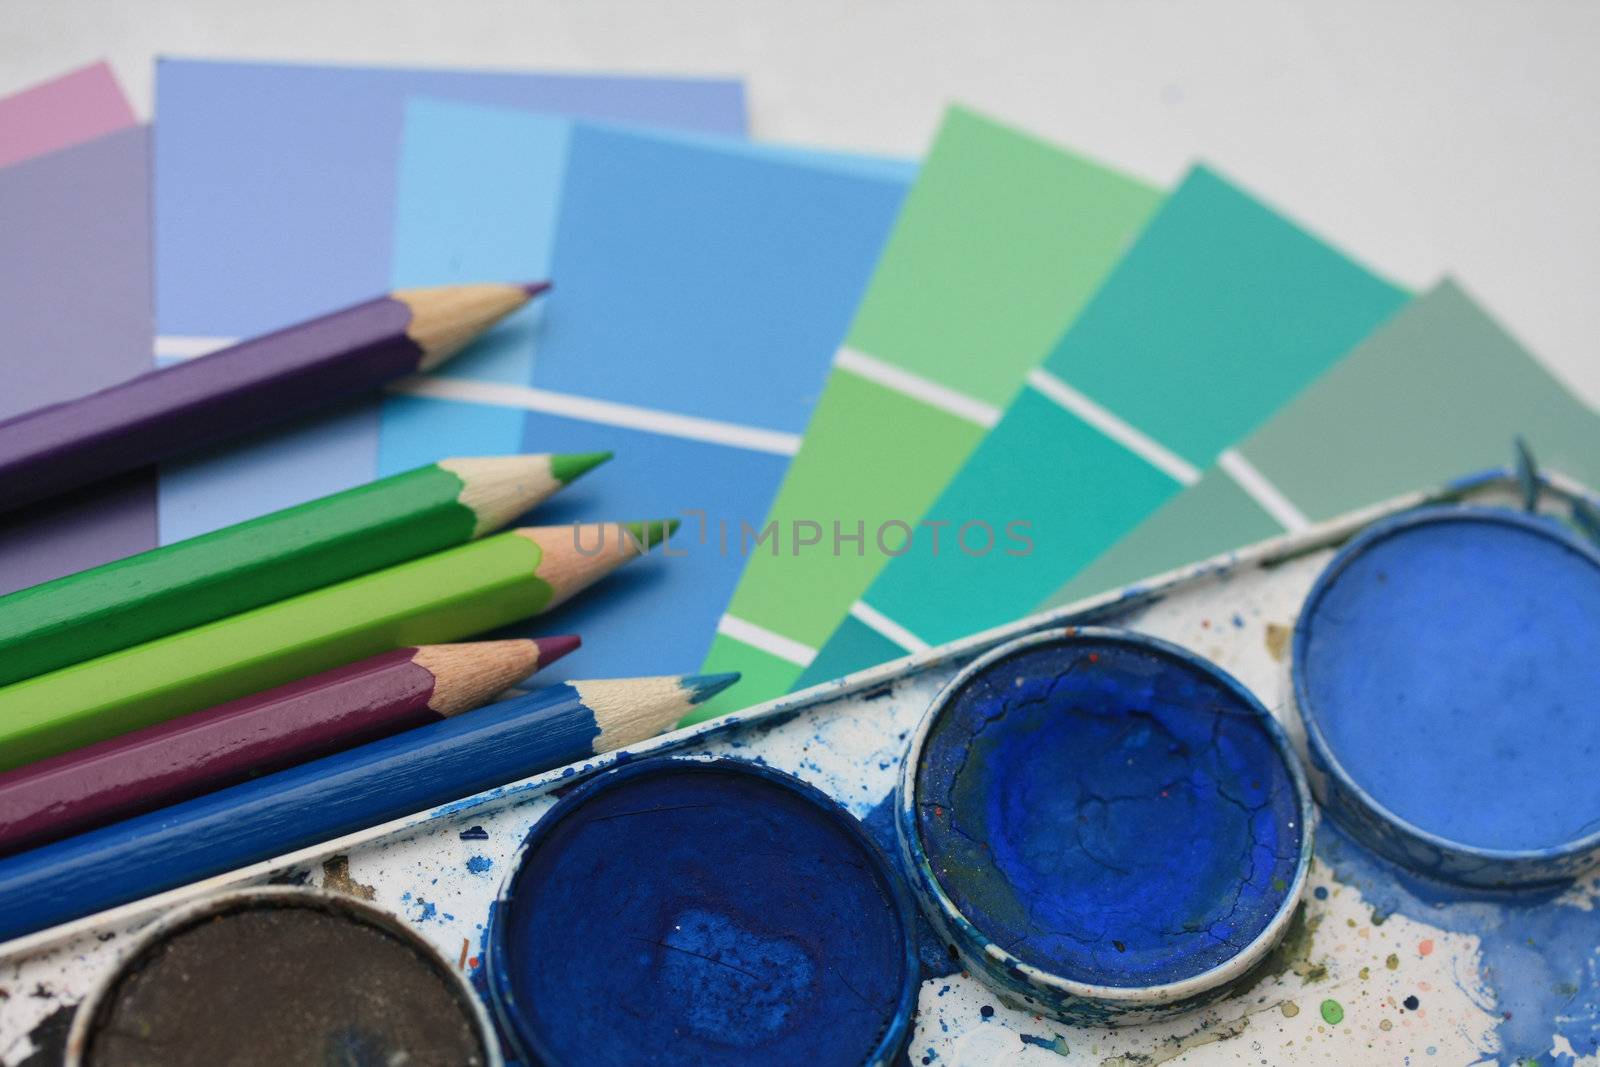 Collection of color samples, water colors and pencils by studioportosabbia